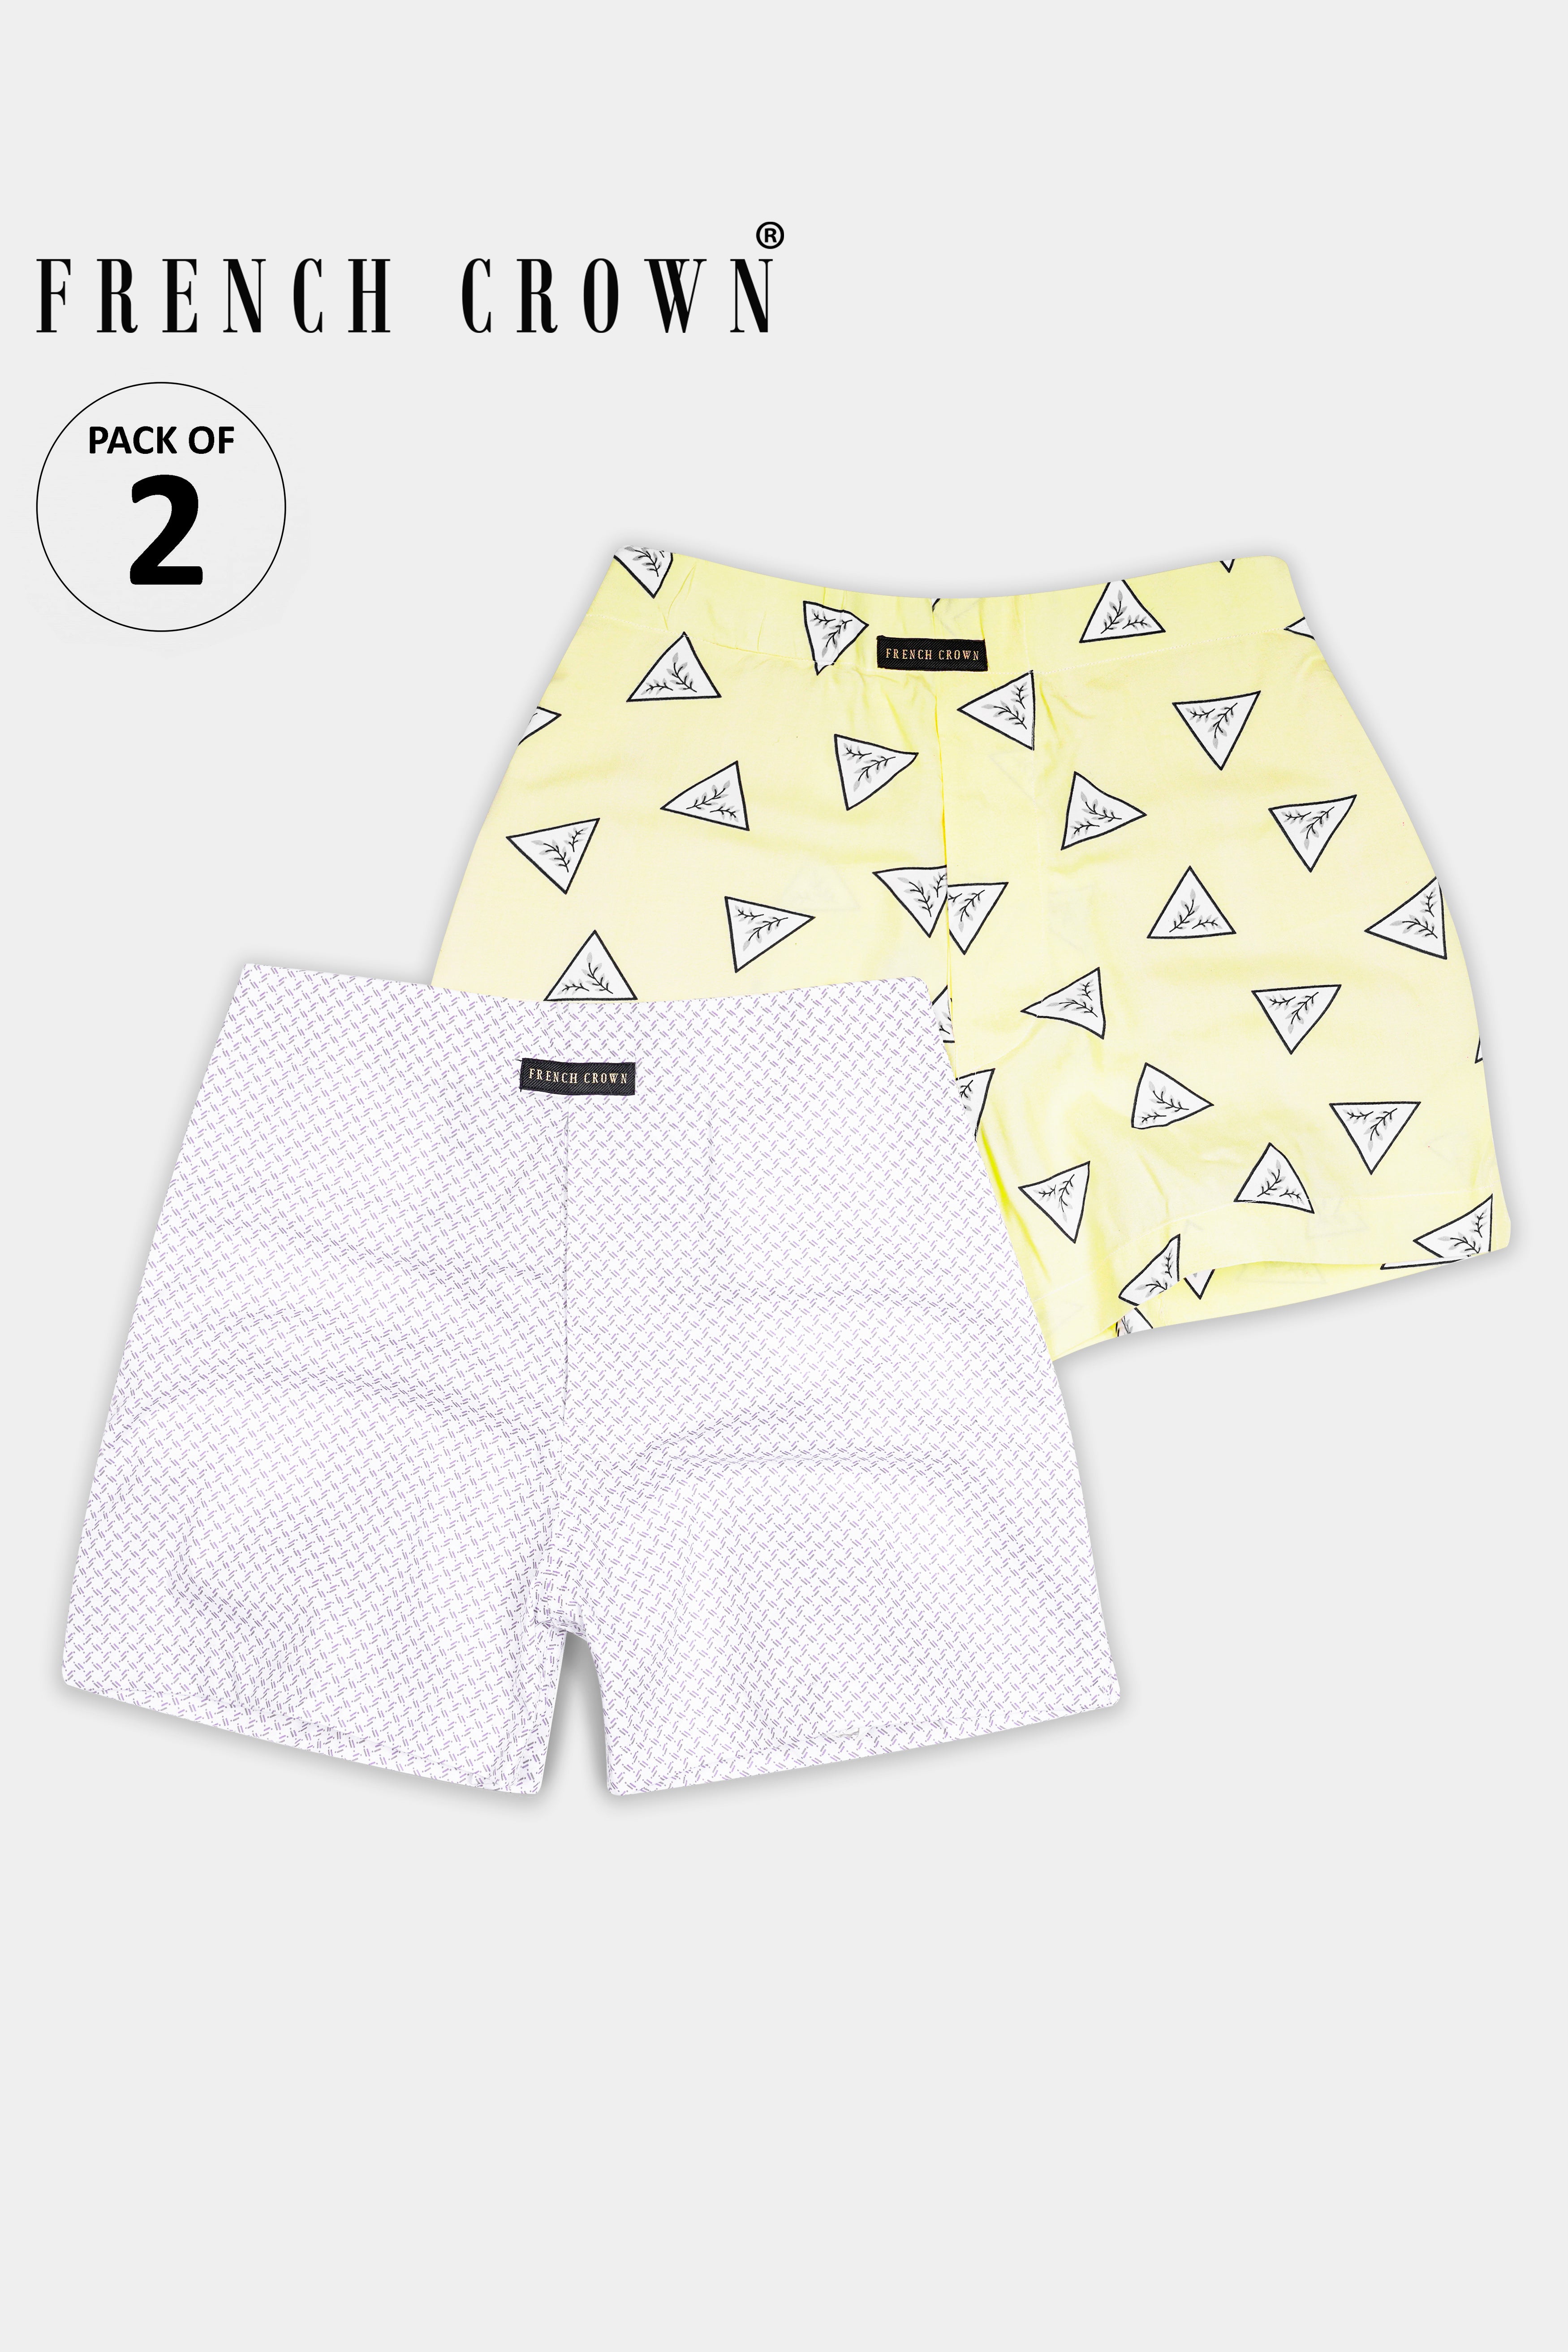 Astra Yellow Triangle Printed and Bright White With Comet Brown Printed Premium Cotton Boxers